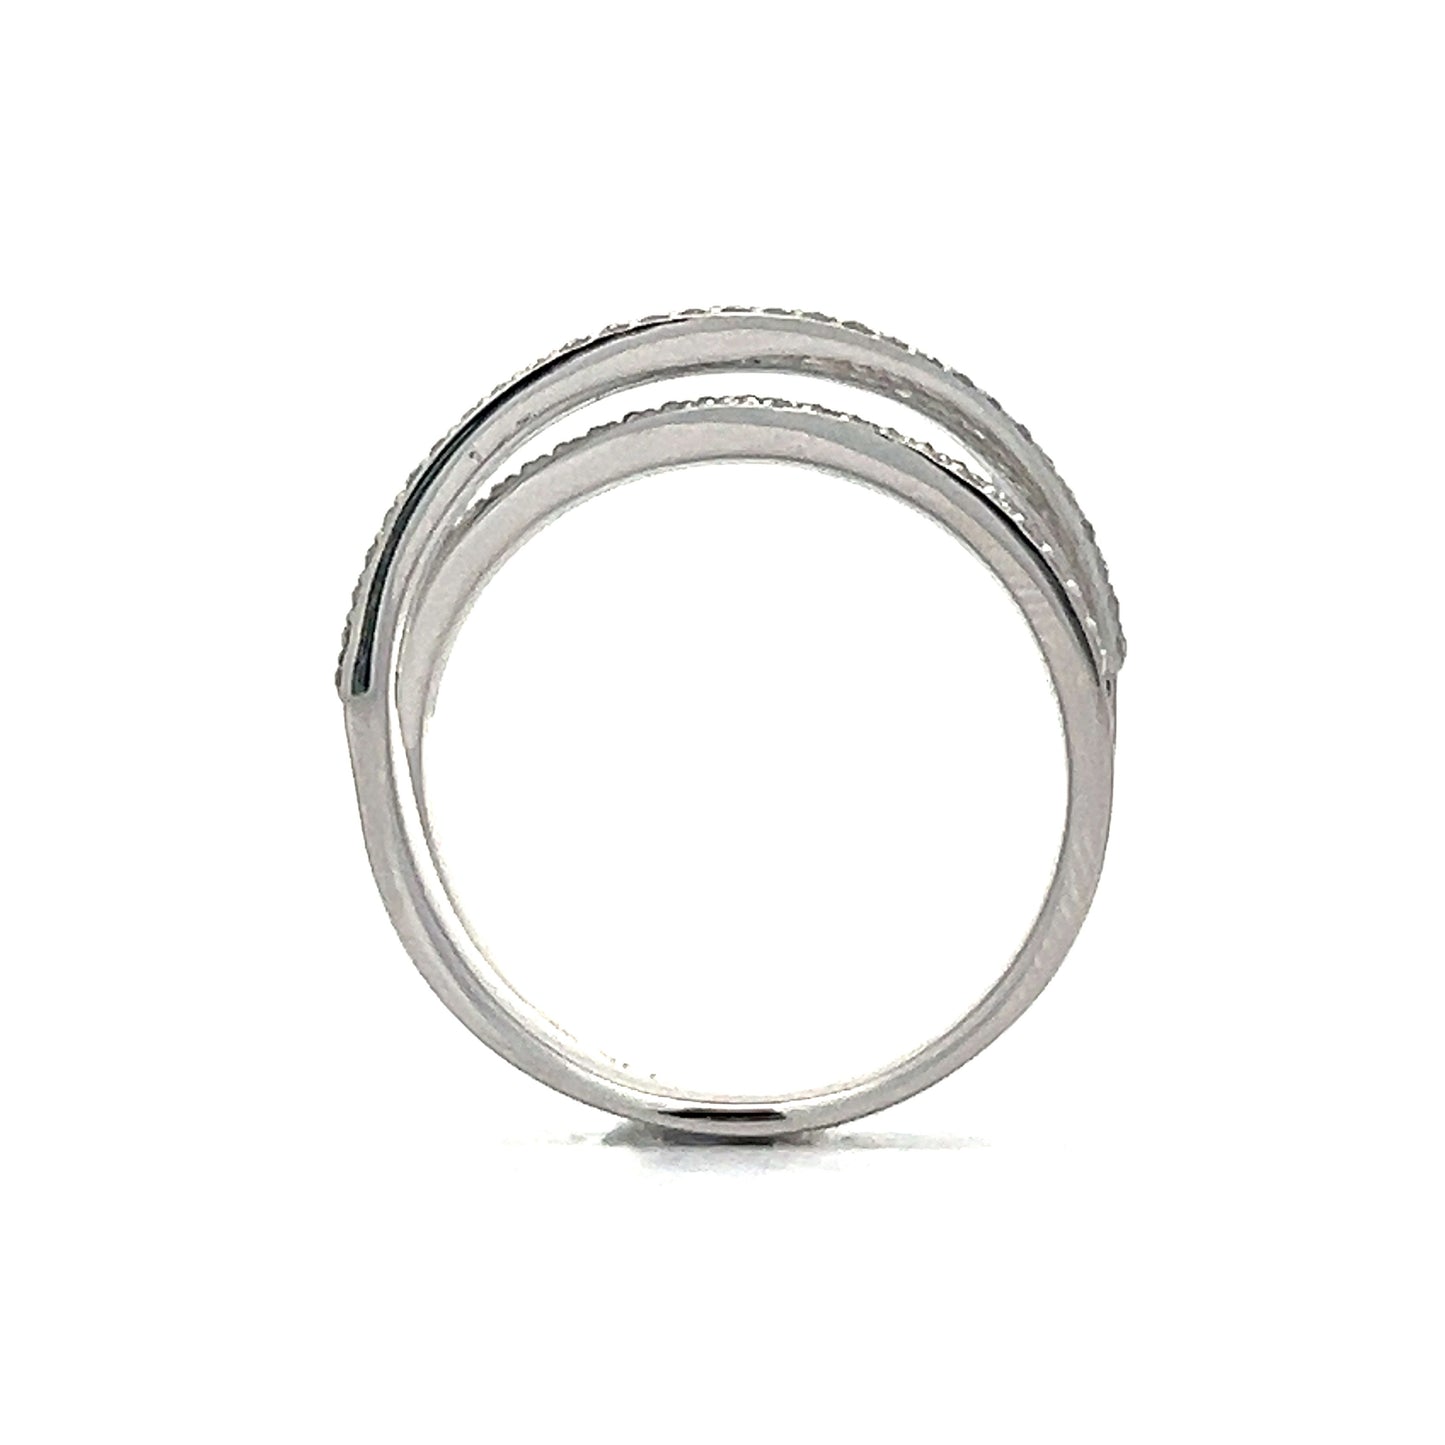 .54 Diamond Pave Cocktail Ring in 14k White Gold